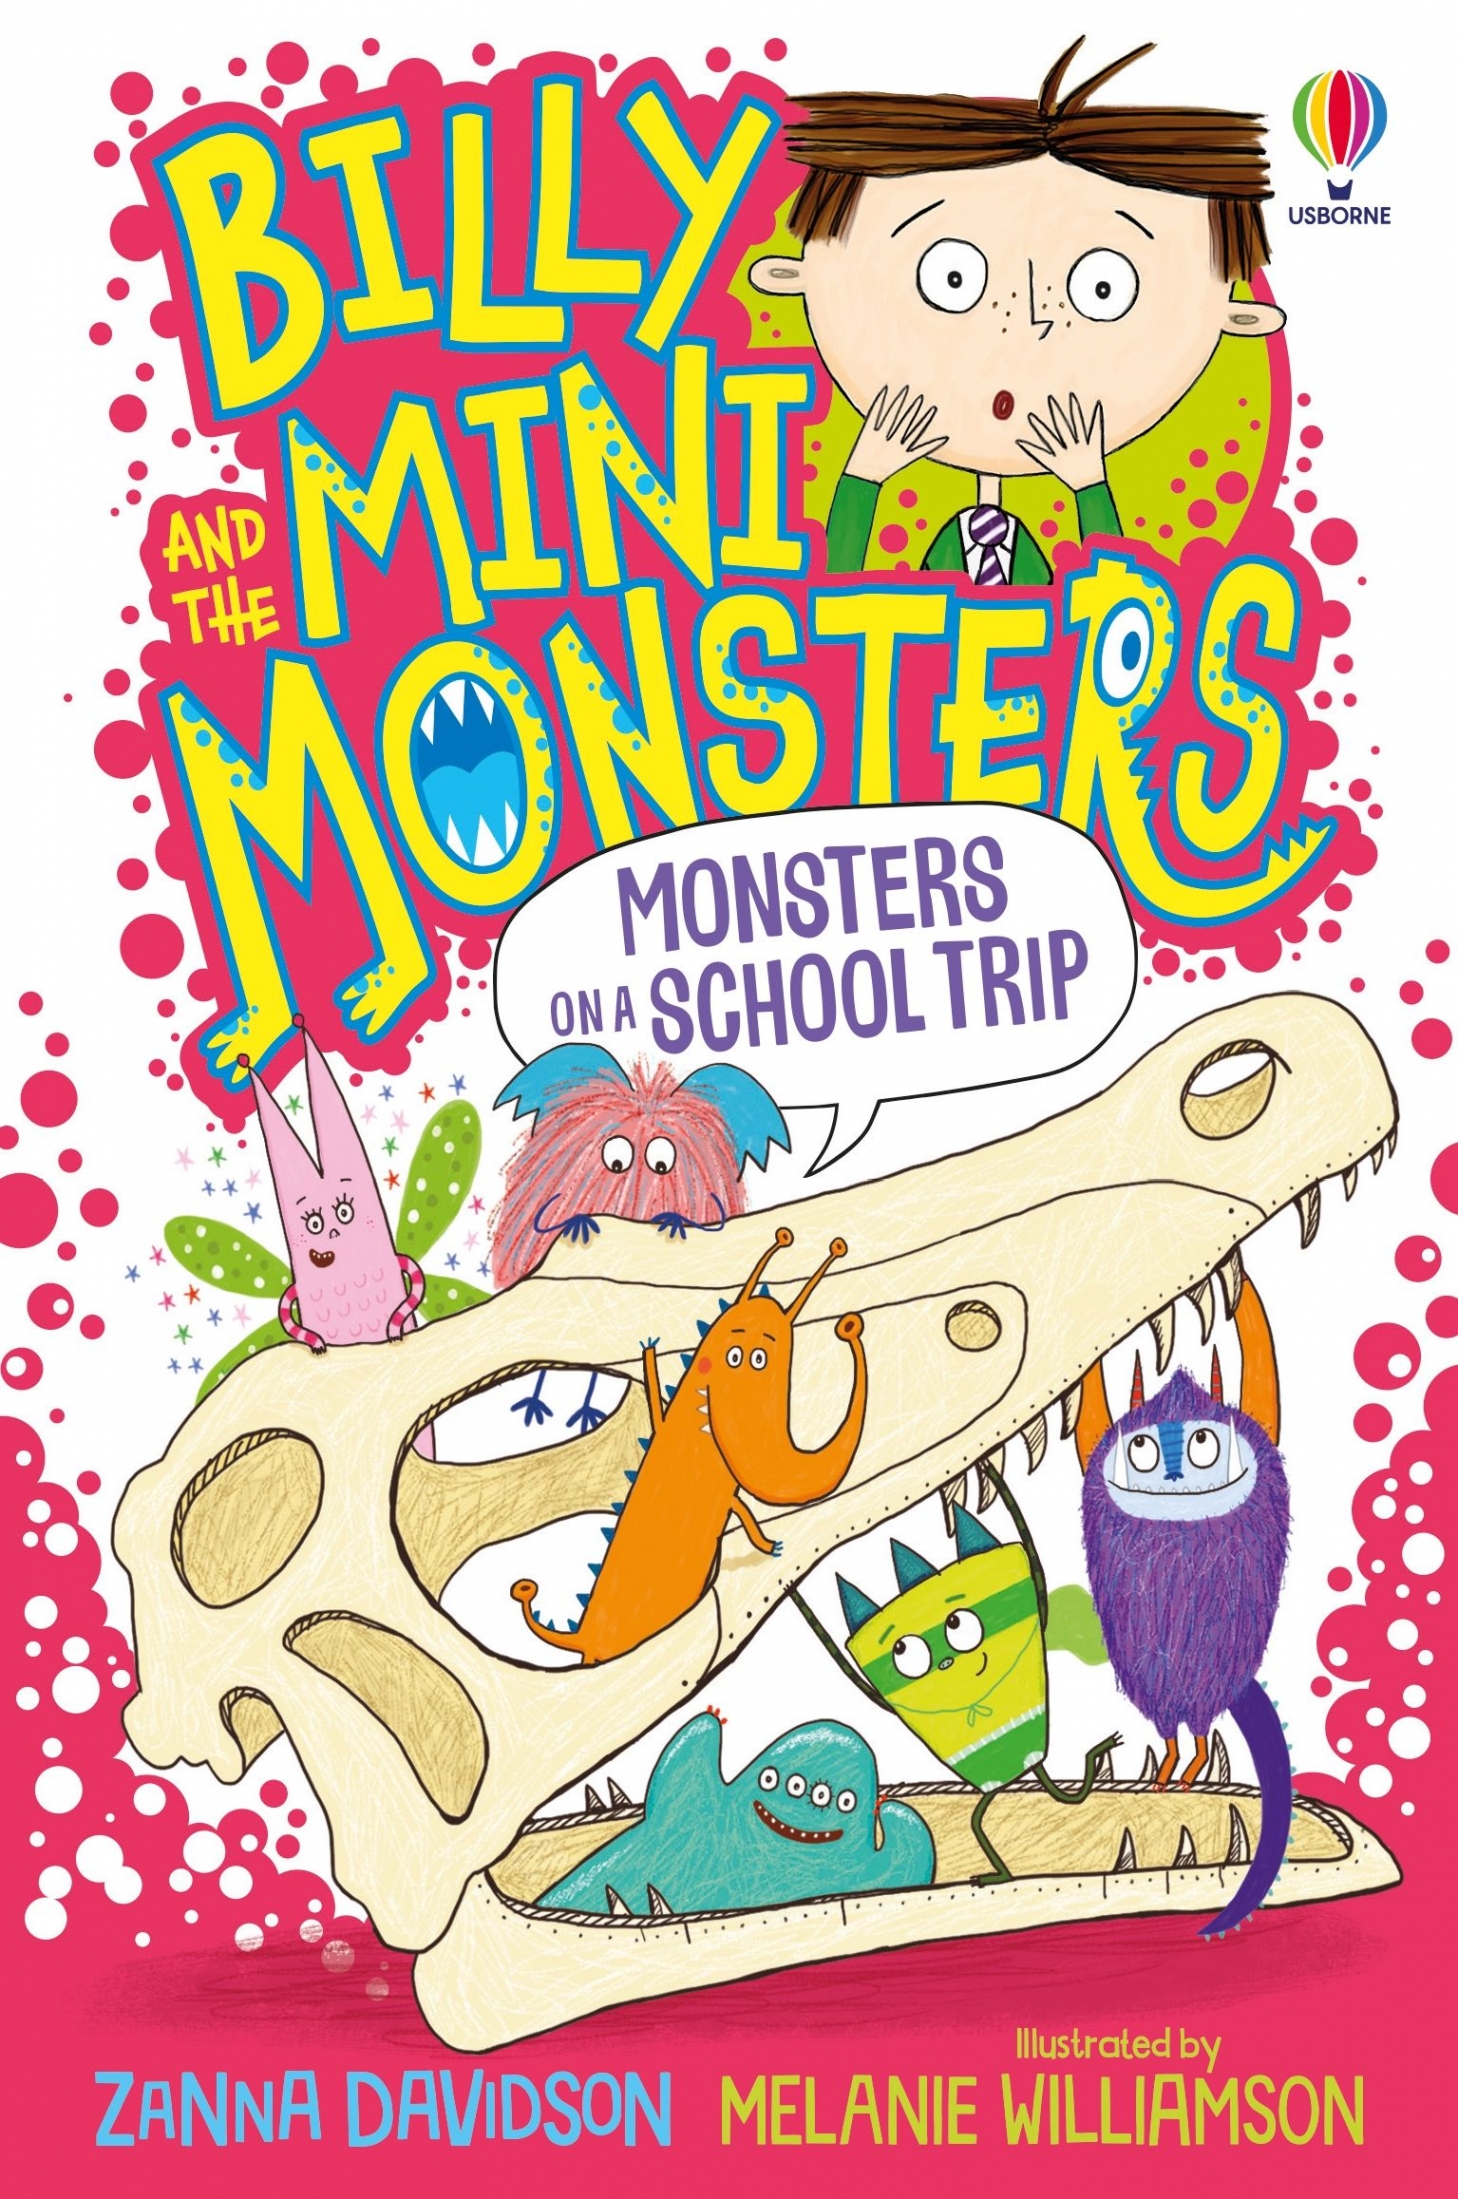 Zanna Davidson Usborne Young Reading 2 Billy and the Mini Monsters - Monsters on a School Trip 